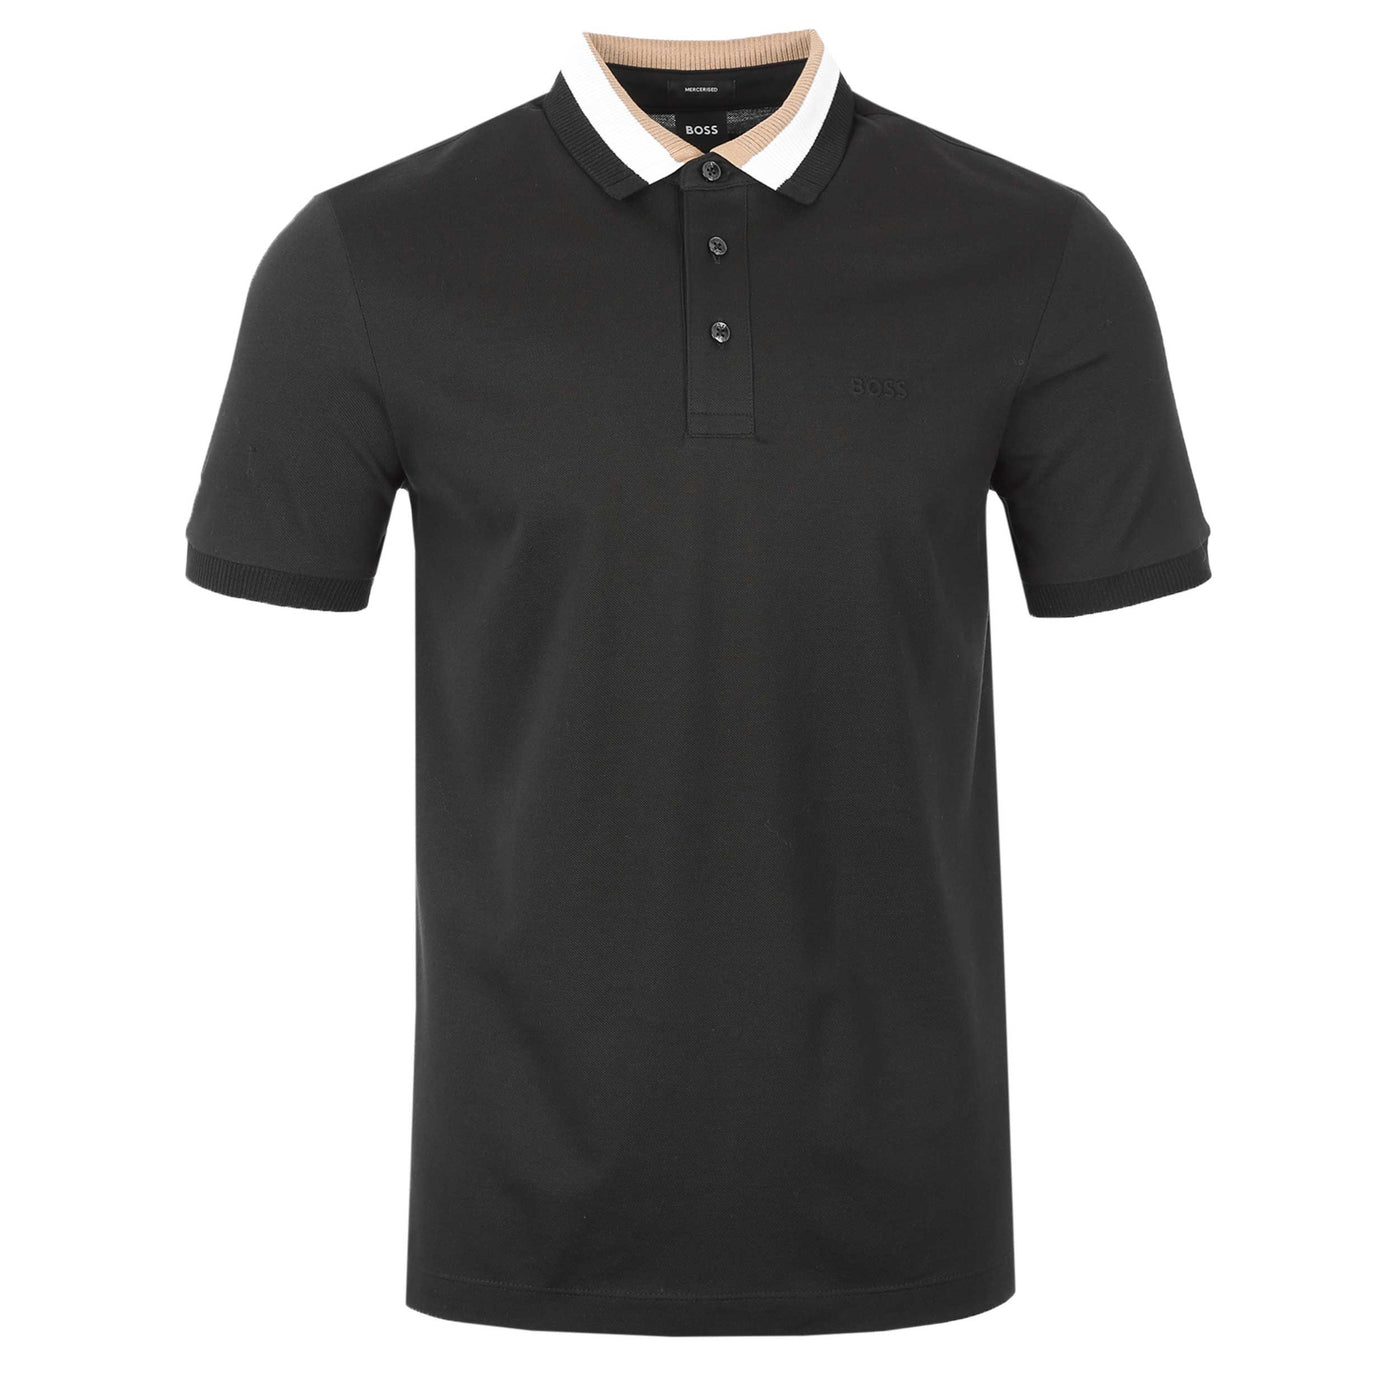 BOSS Prout 37 Polo Shirt in Black